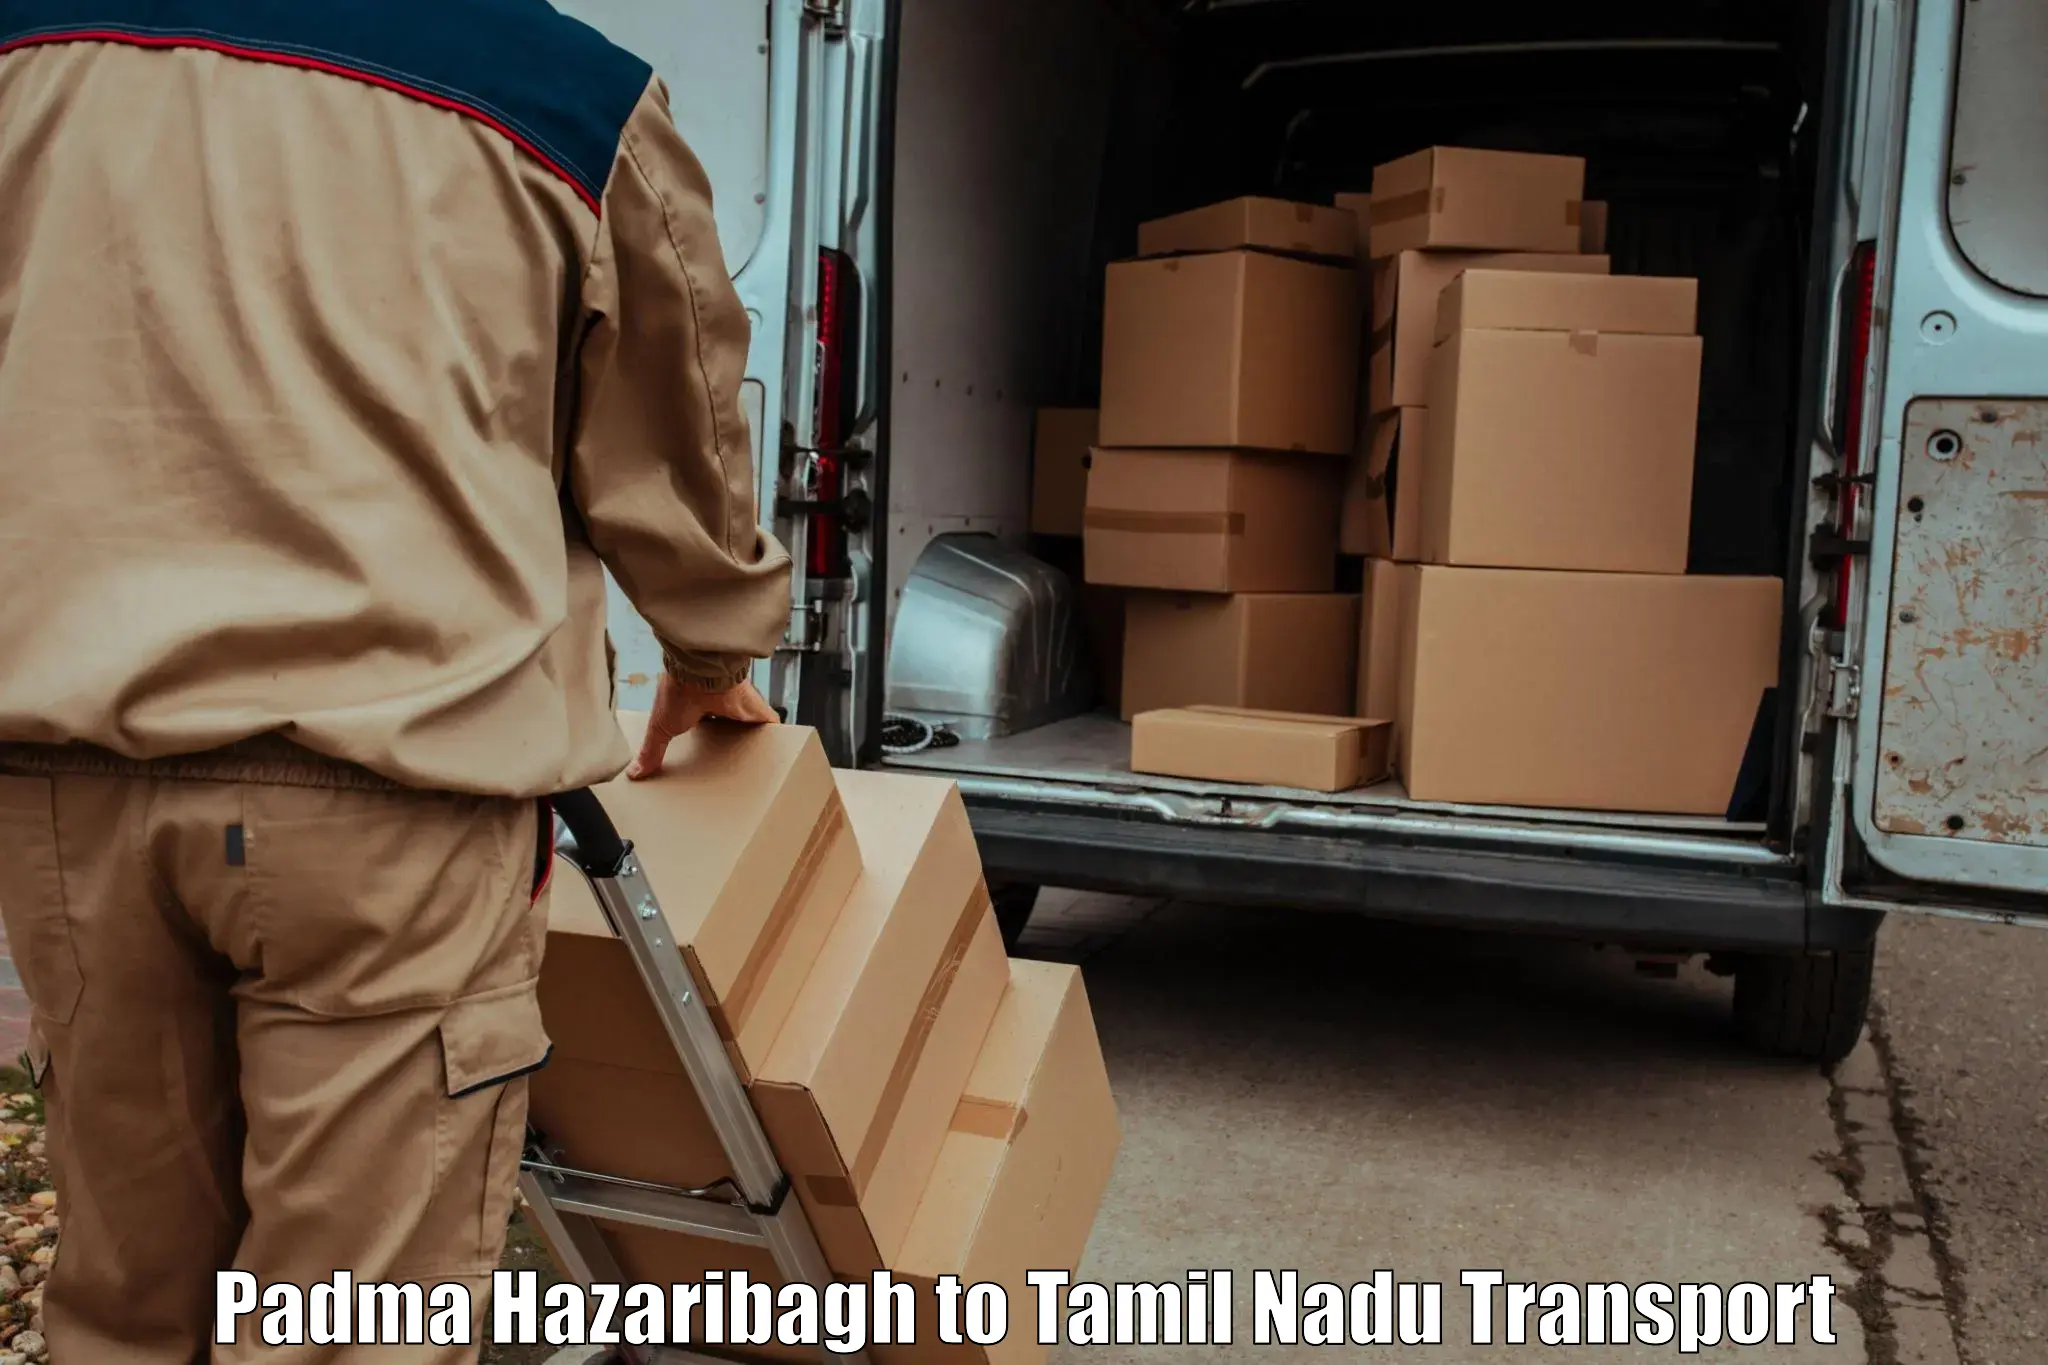 Online transport service Padma Hazaribagh to Sri Ramachandra Institute of Higher Education and Research Chennai